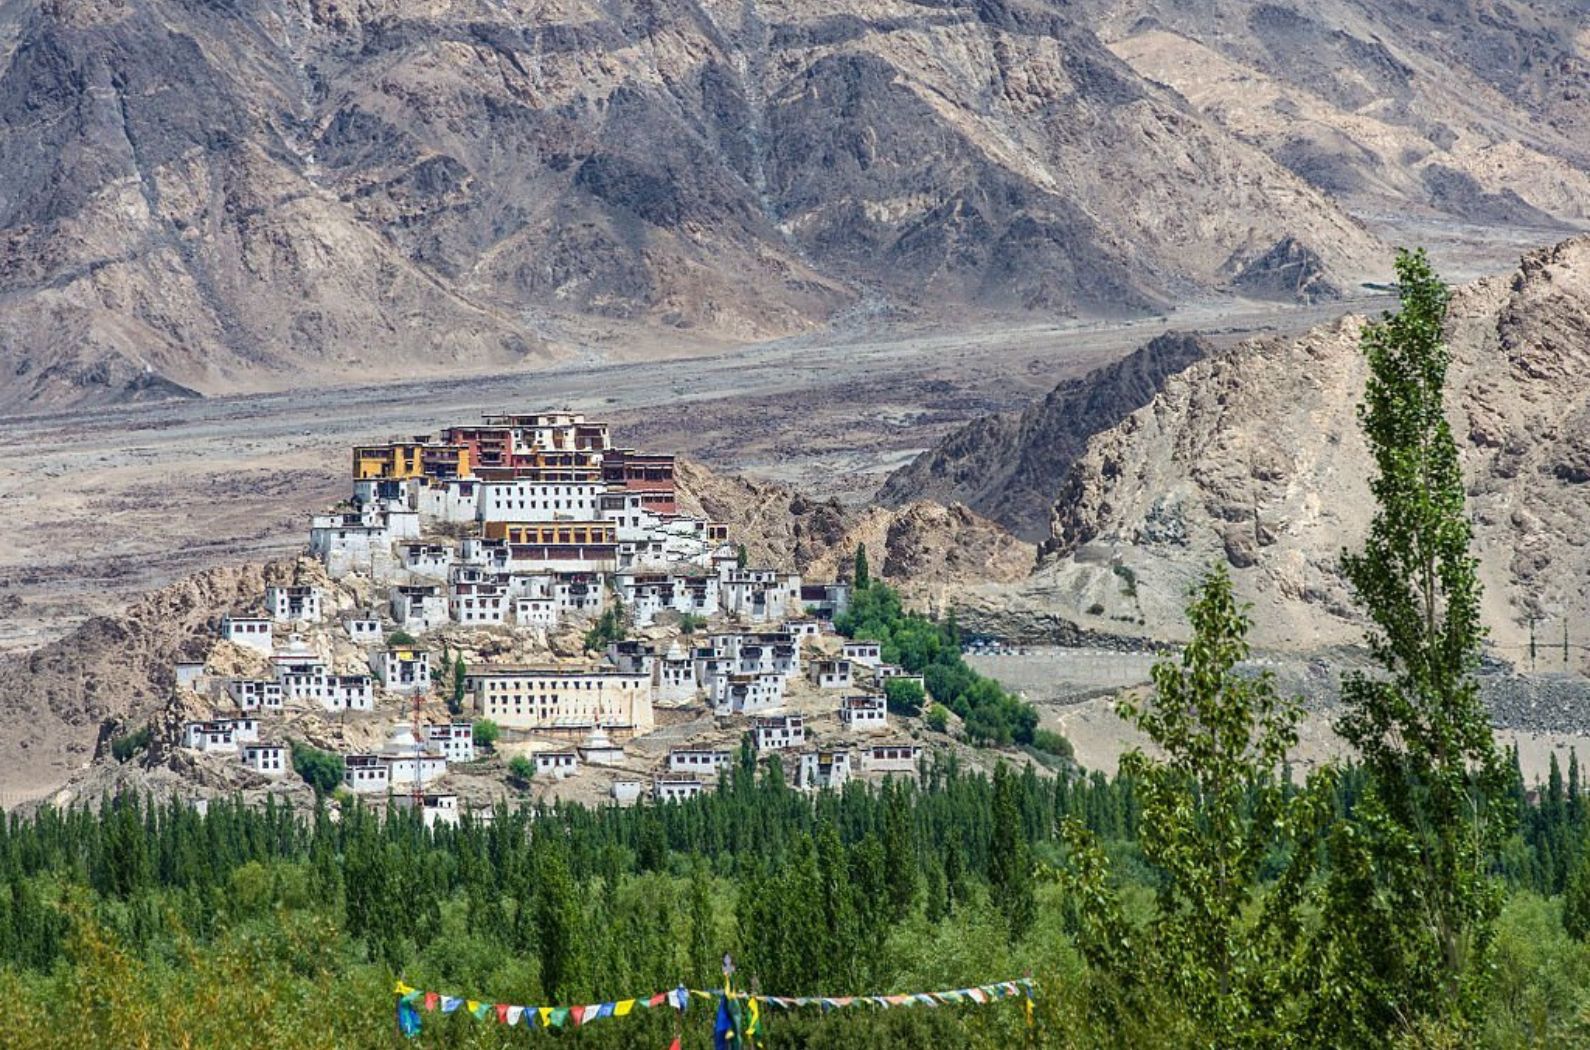 The front view of thiksey Monastery